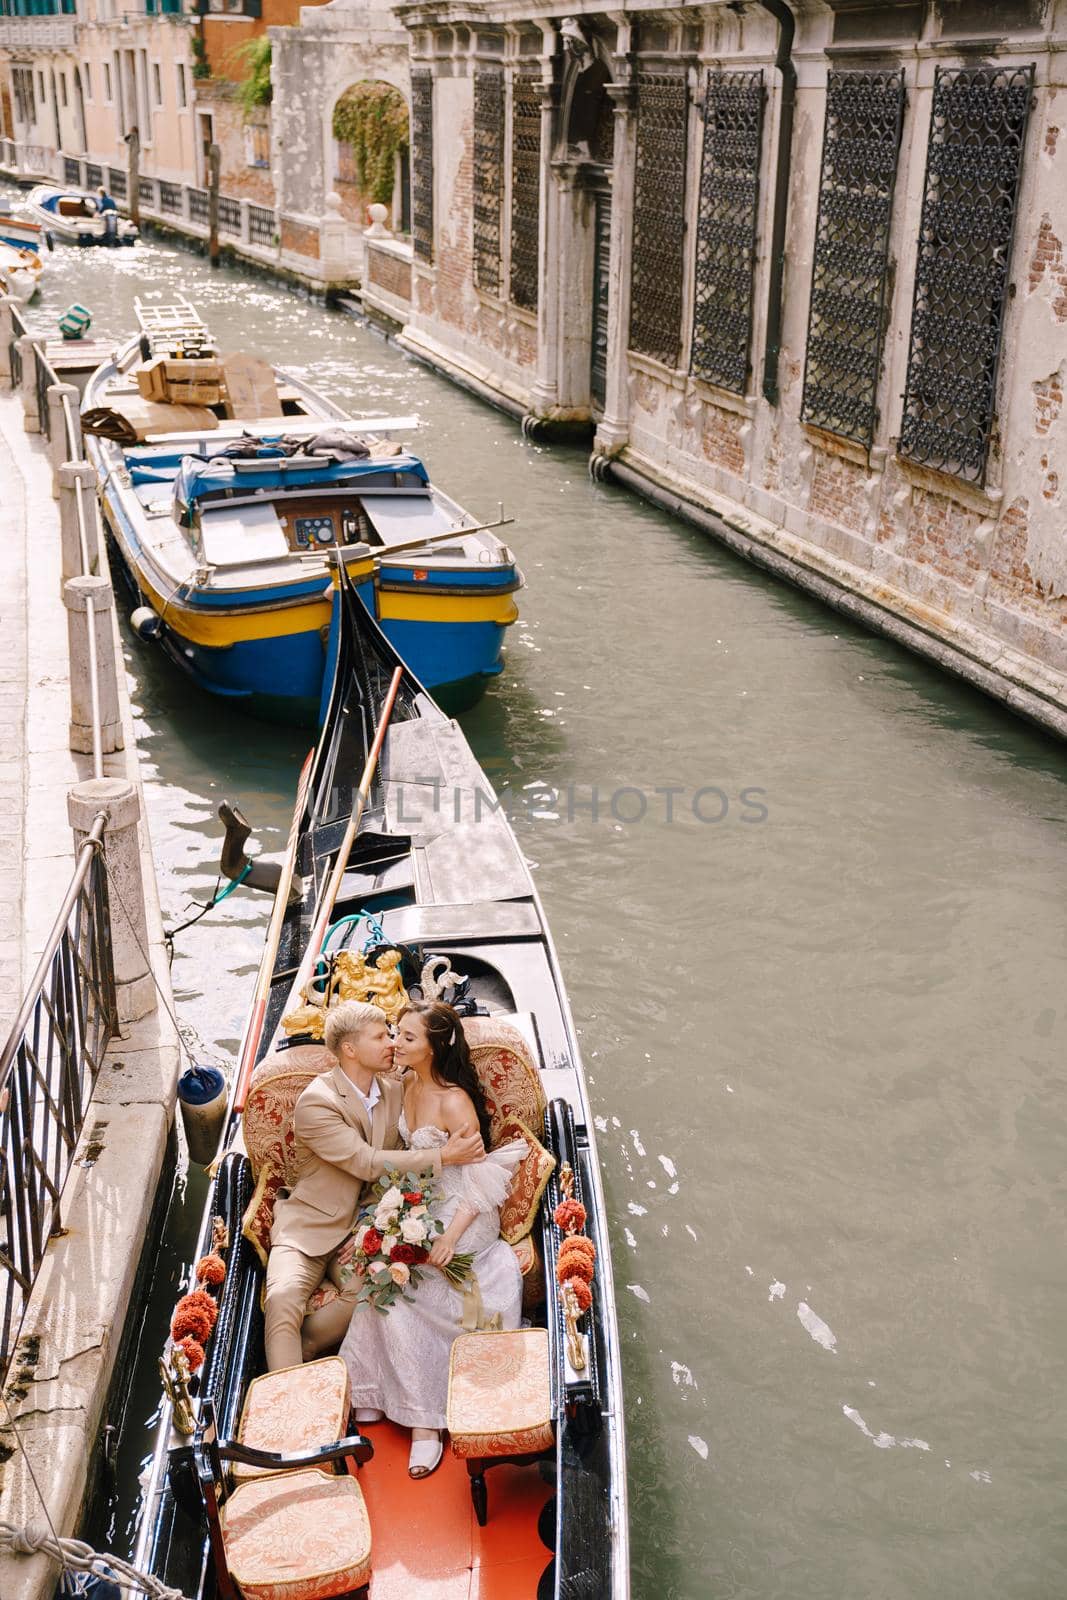 Italy wedding in Venice. A gondolier rolls a bride and groom in a classic wooden gondola along a narrow Venetian canal. Newlyweds kiss in a boat moored to the shore. by Nadtochiy